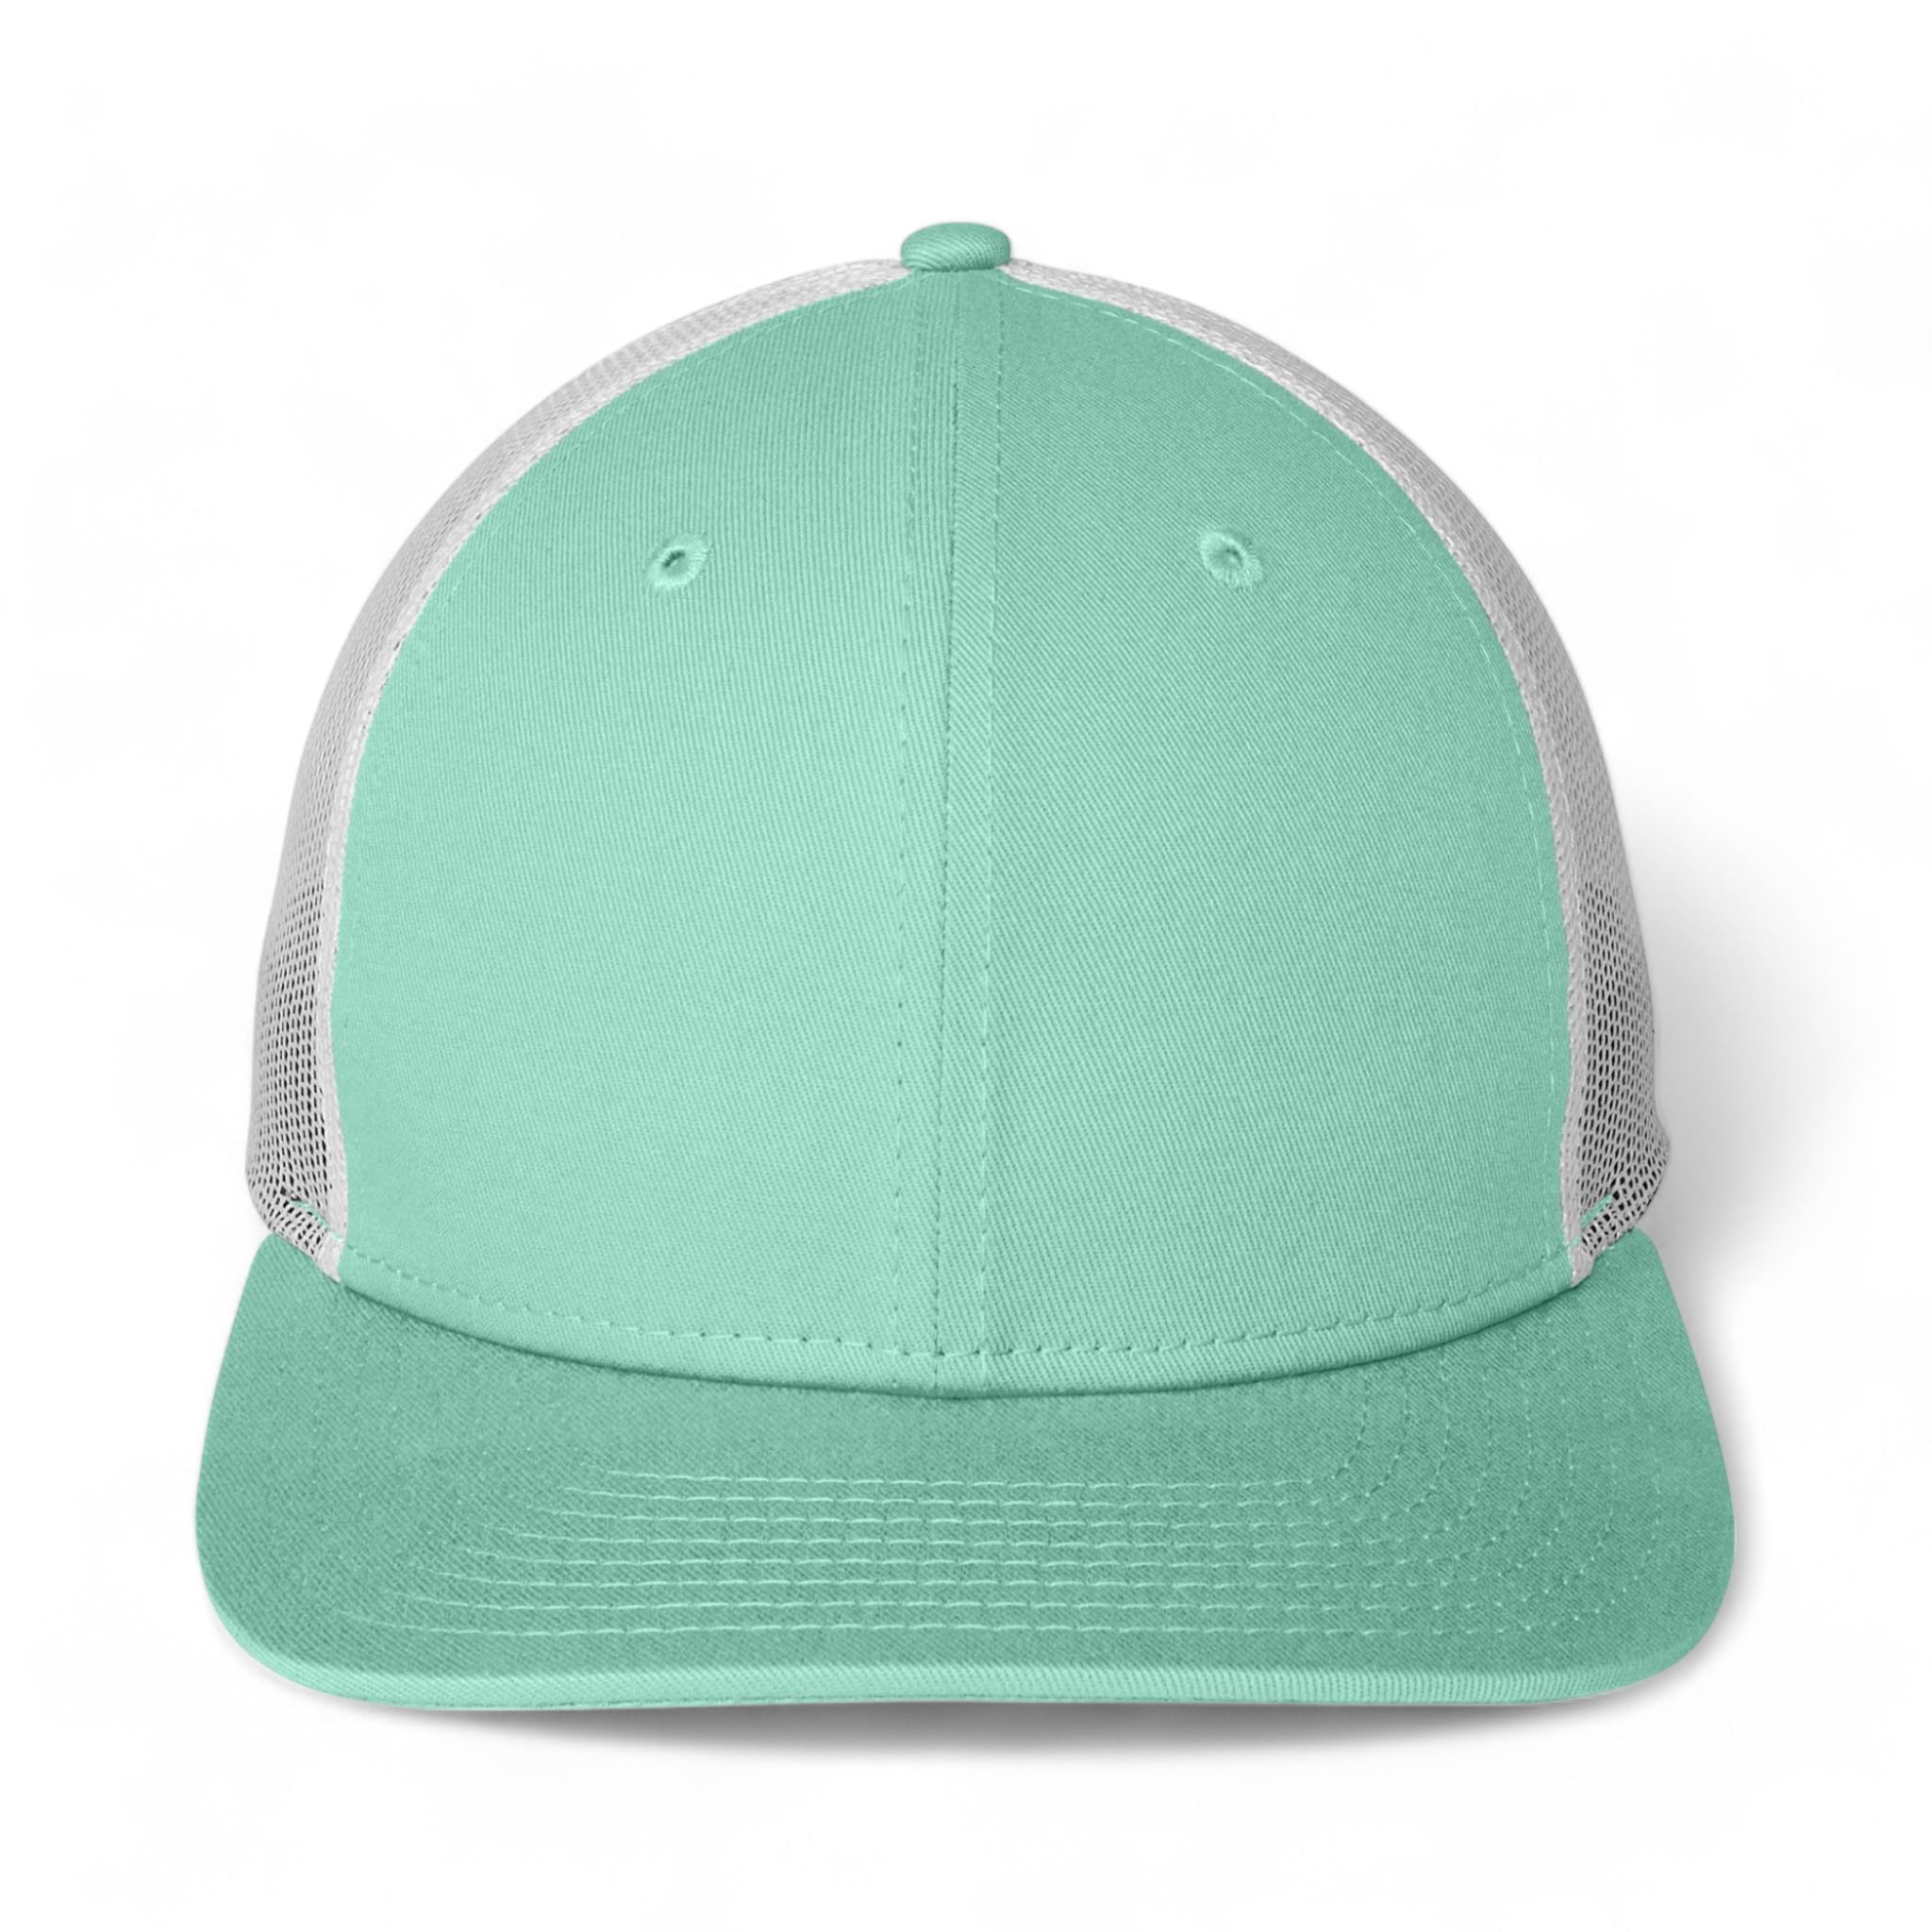 Front view of New Era NE207 custom hat in mint and white